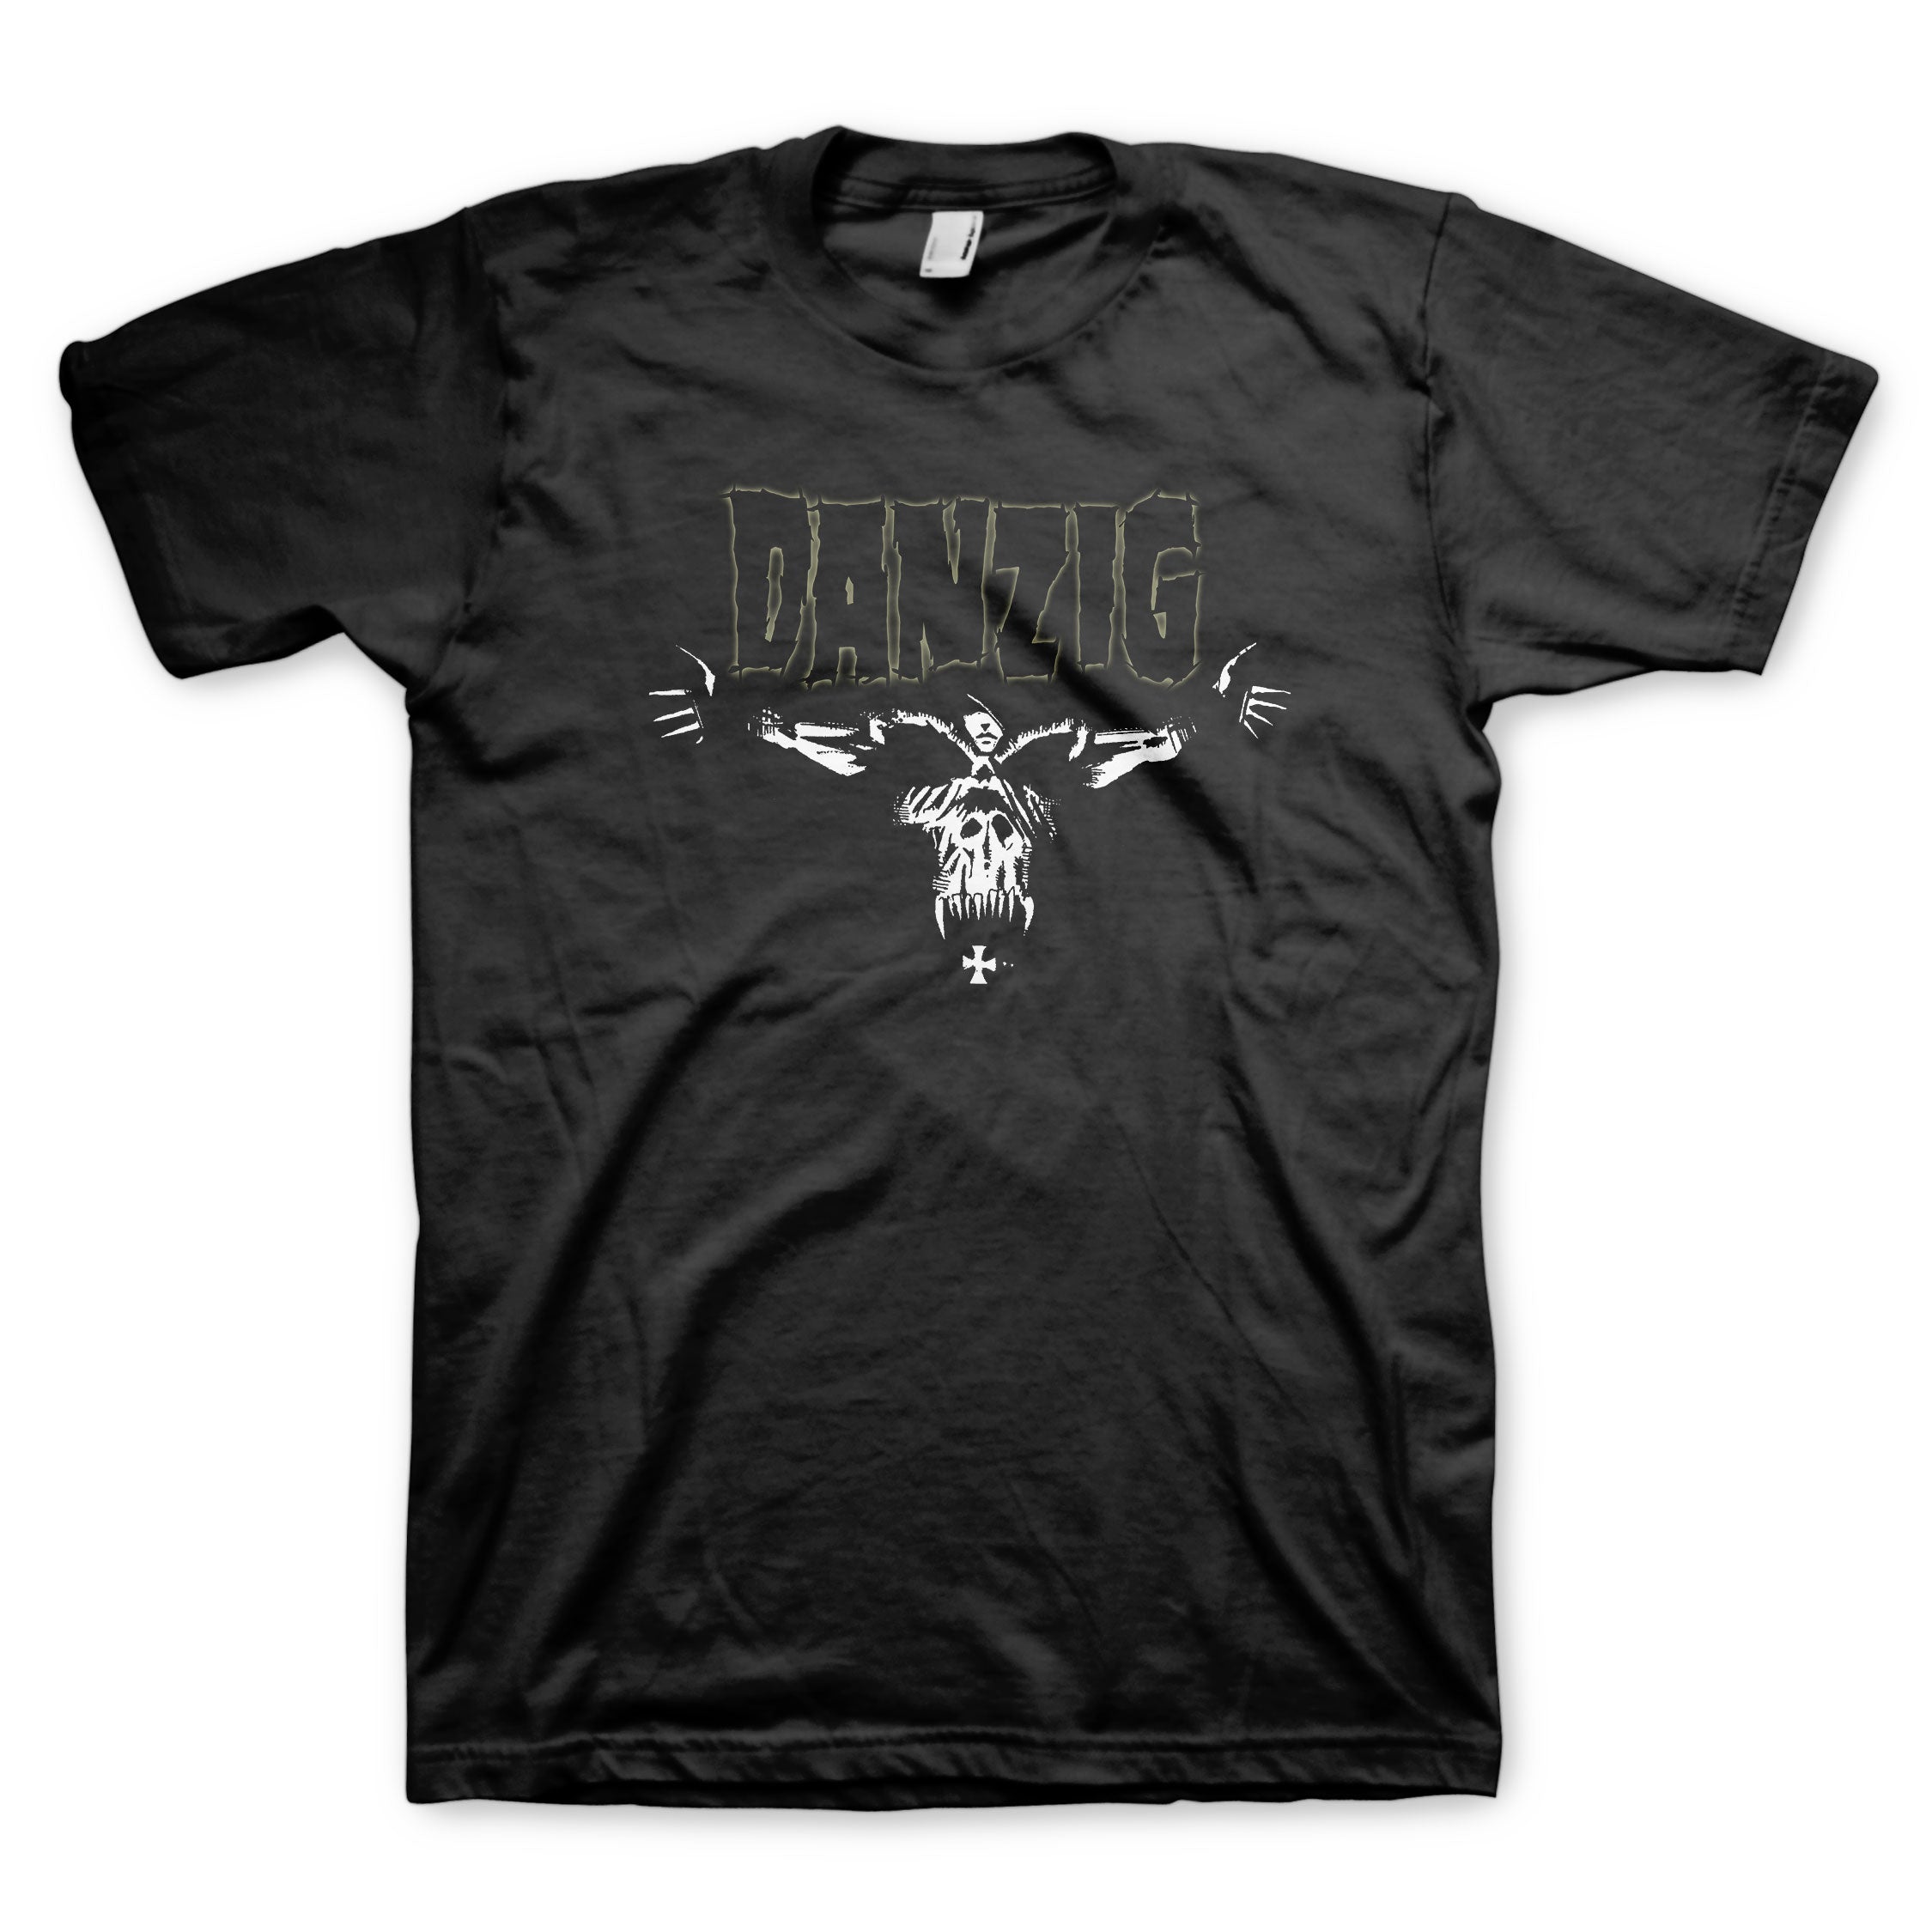 Danzig Outstretched Arms T-Shirt